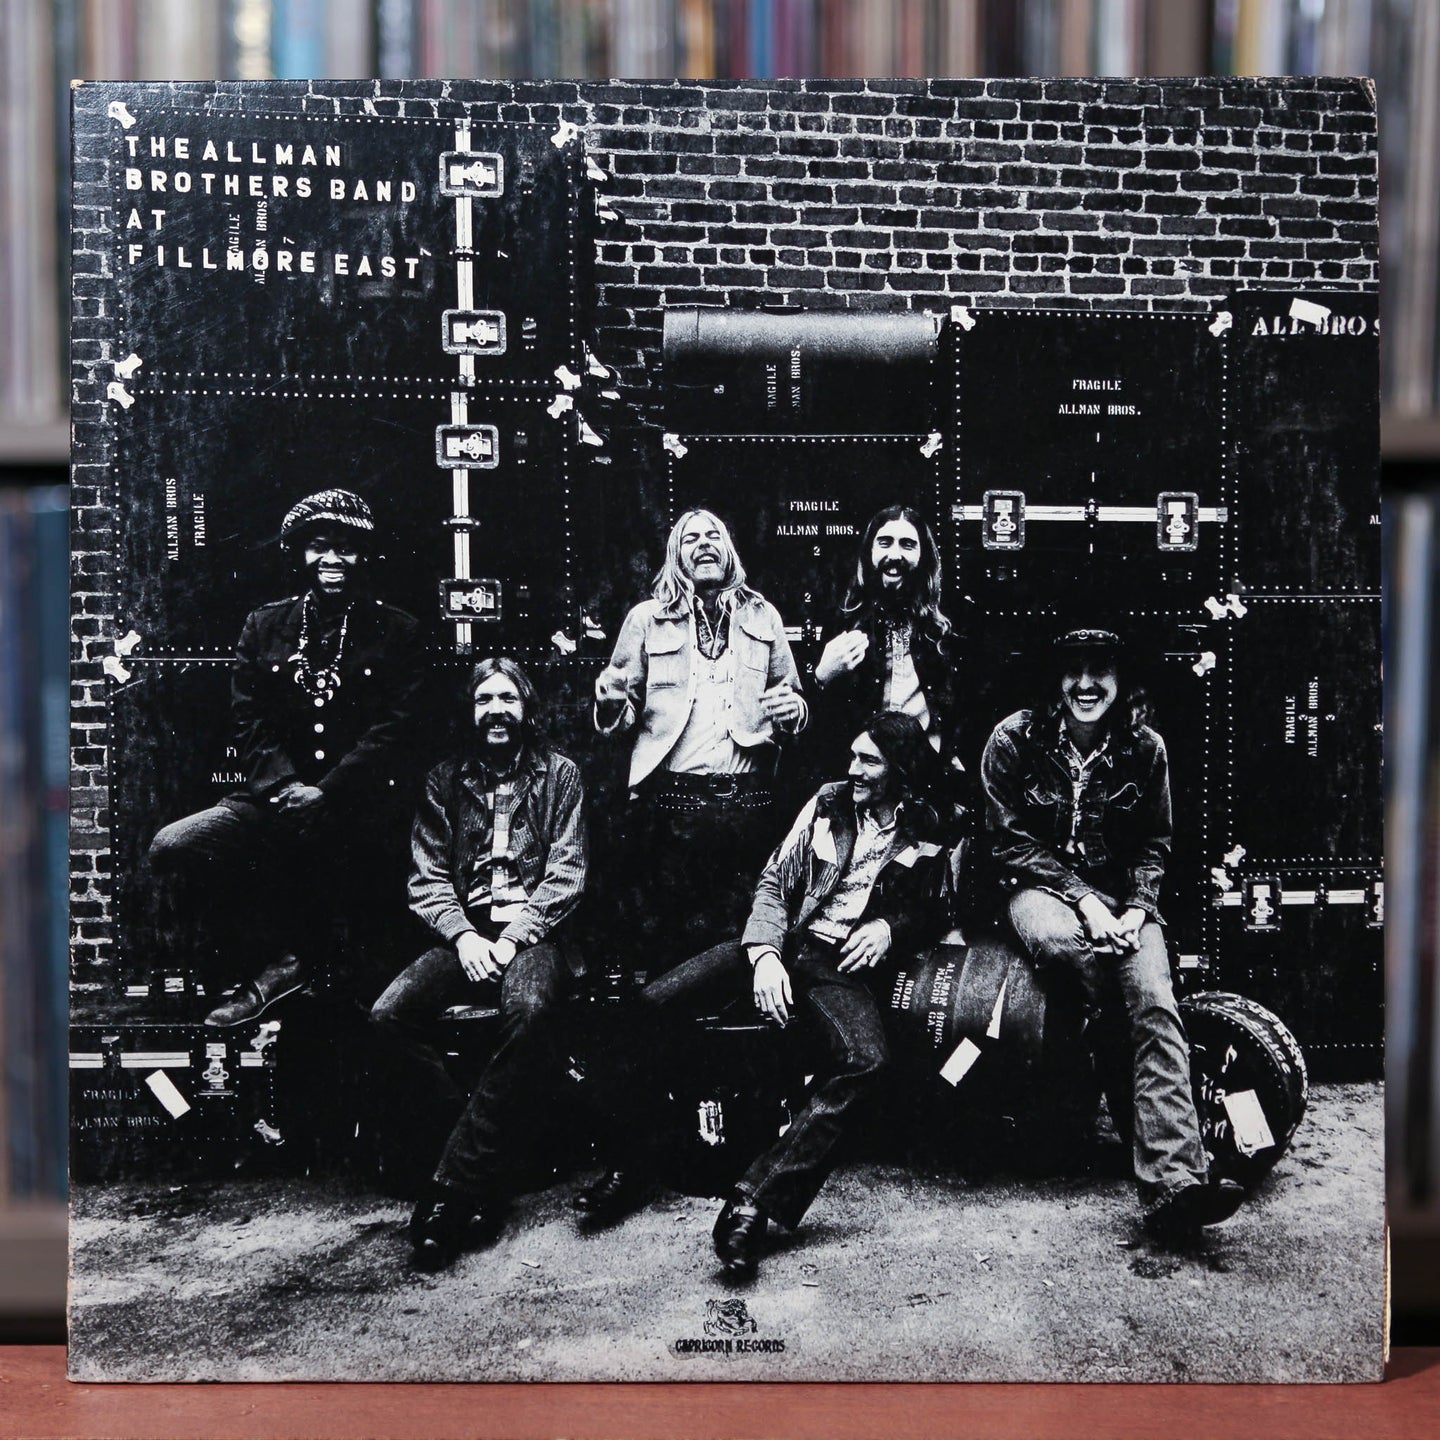 Allman Brothers - The Allman Brothers Band At Fillmore East - 2LP - 1974 Capricorn, EX/VG+